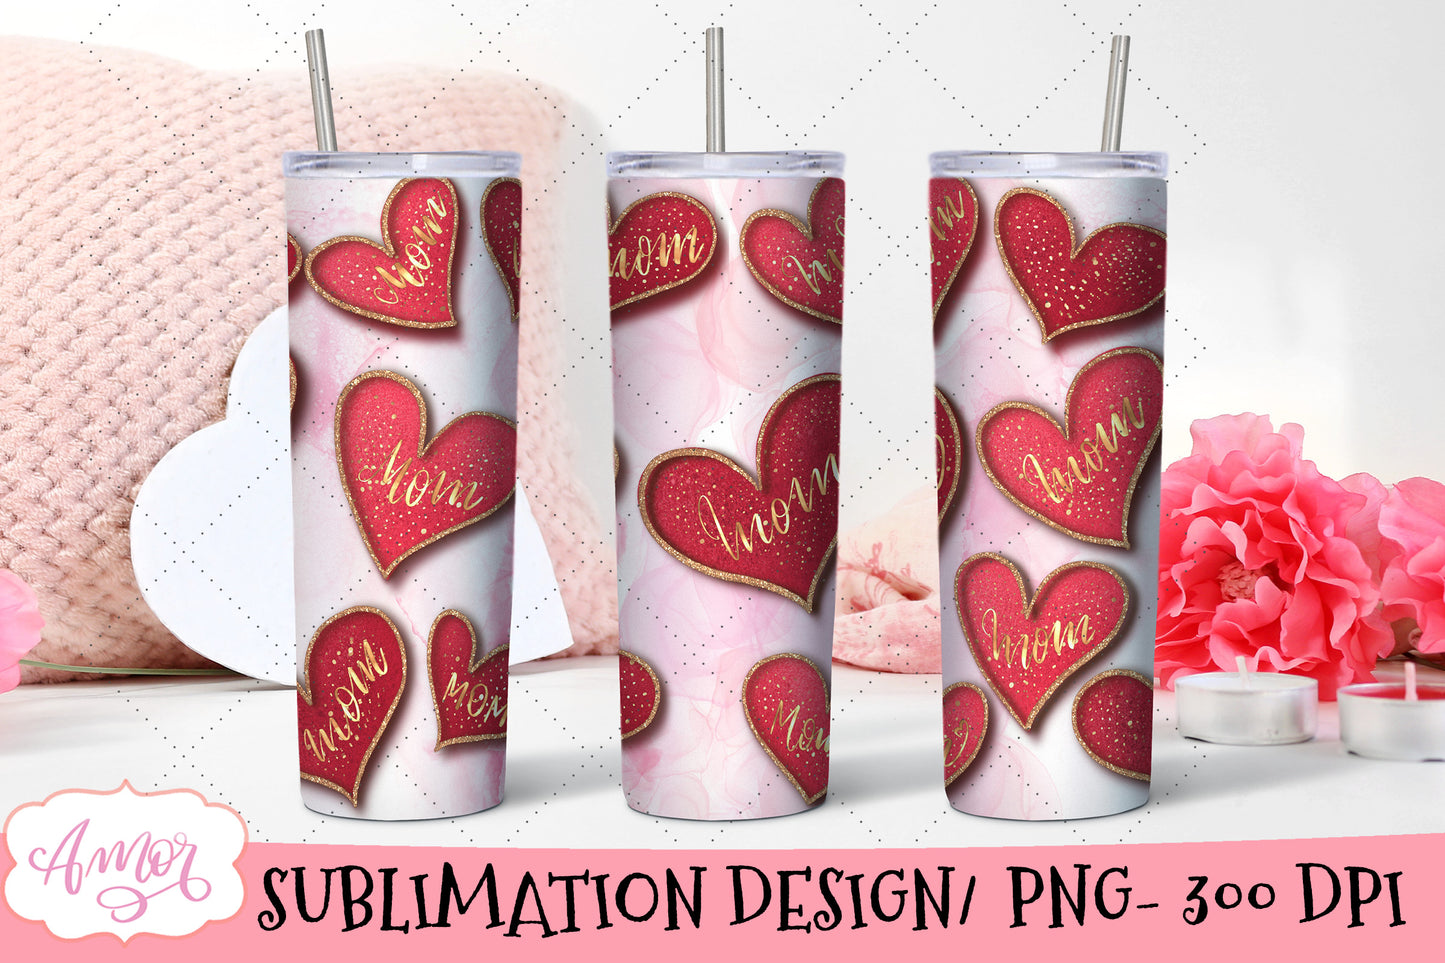 Mom Hearts Tumbler Wrap for Sublimation